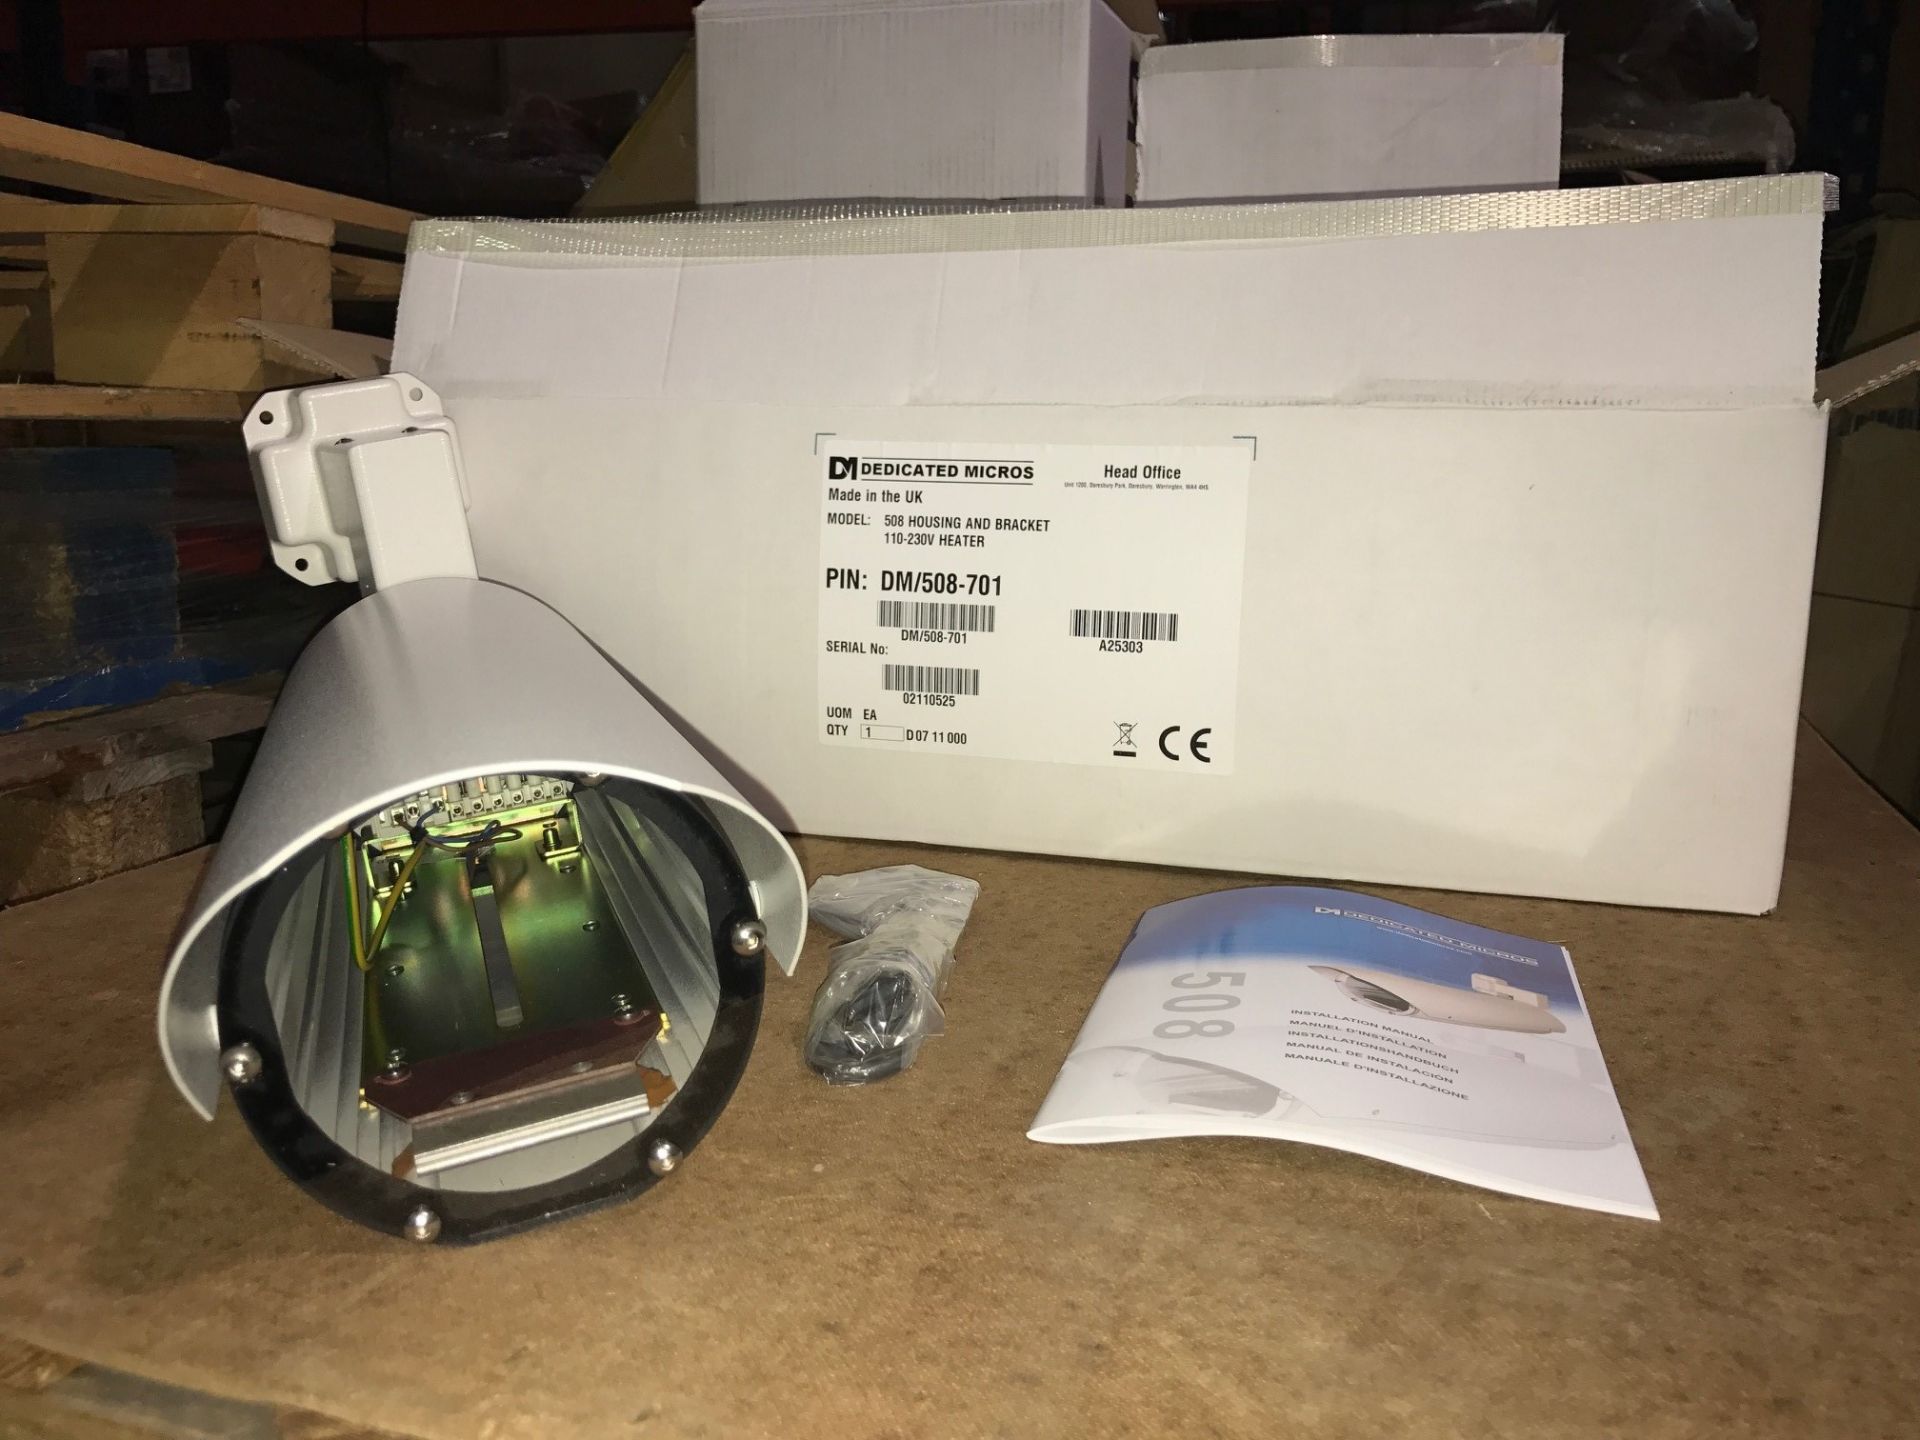 1 x Dedicated Micros DM/508-701 Housing and Bracket 110-230V Heater (Brand New & Boxed) - Image 2 of 4